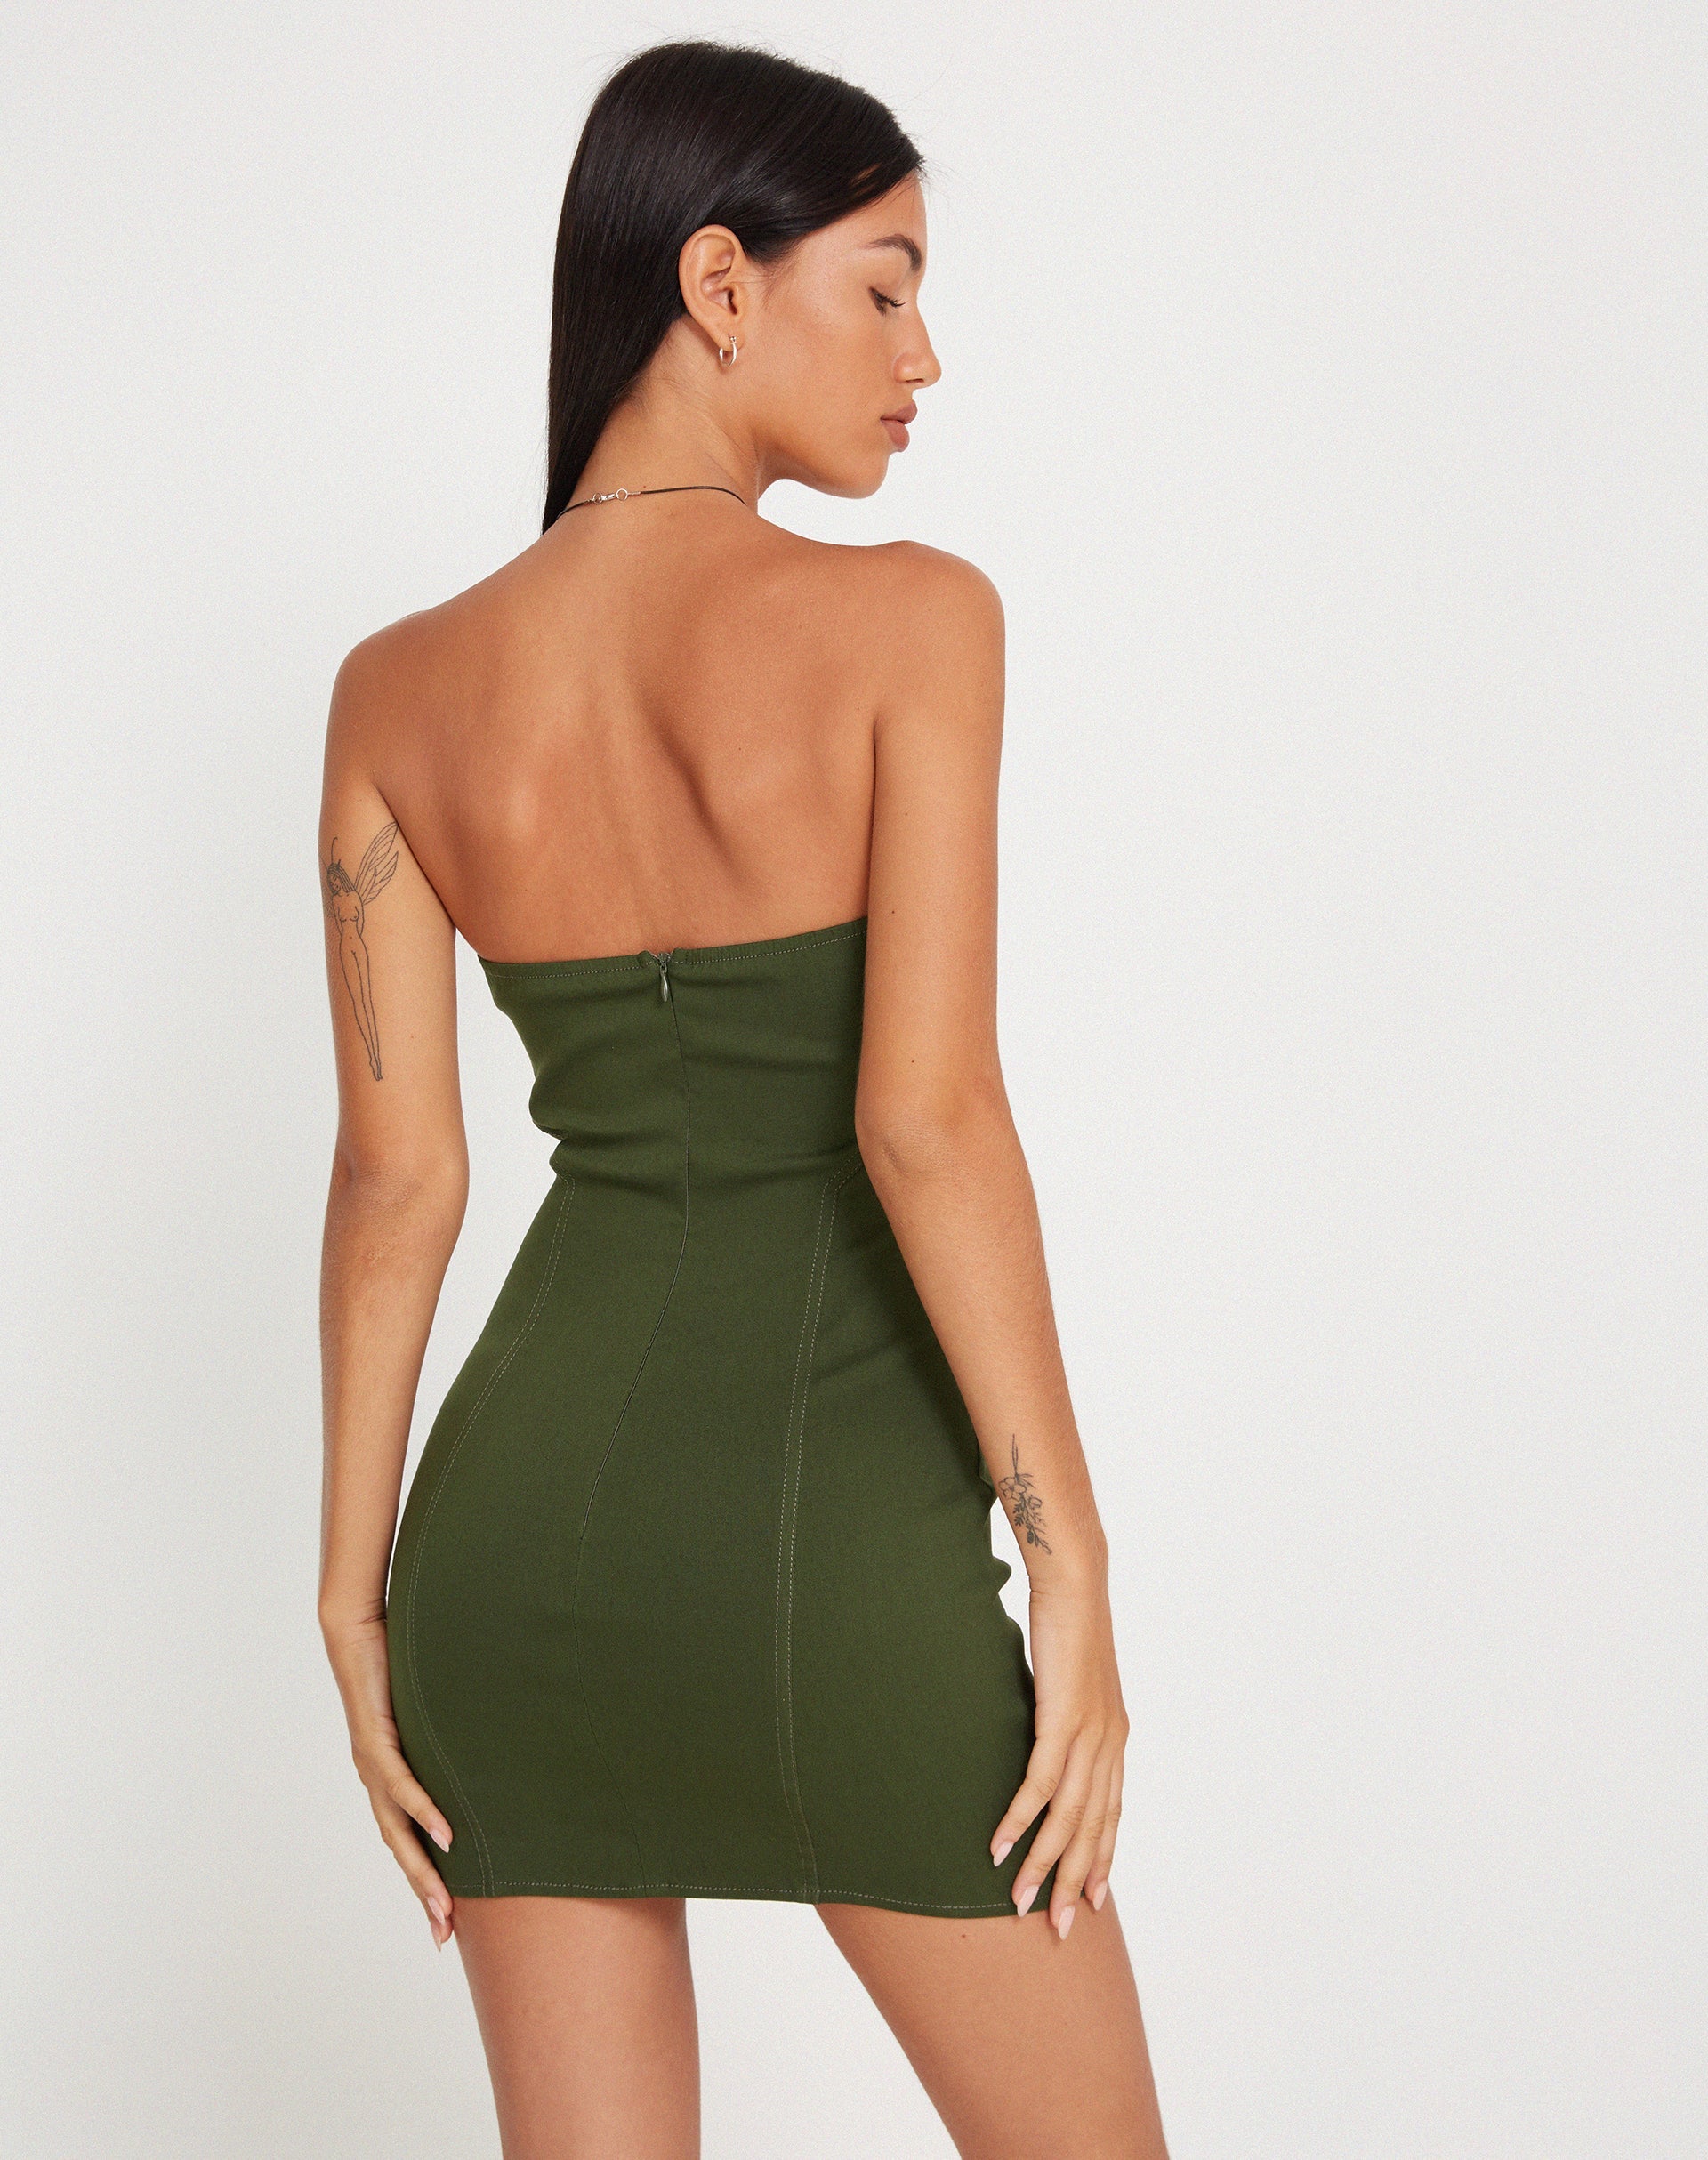 image of Sumner Bodycon Mini Dress in Tailoring Chive